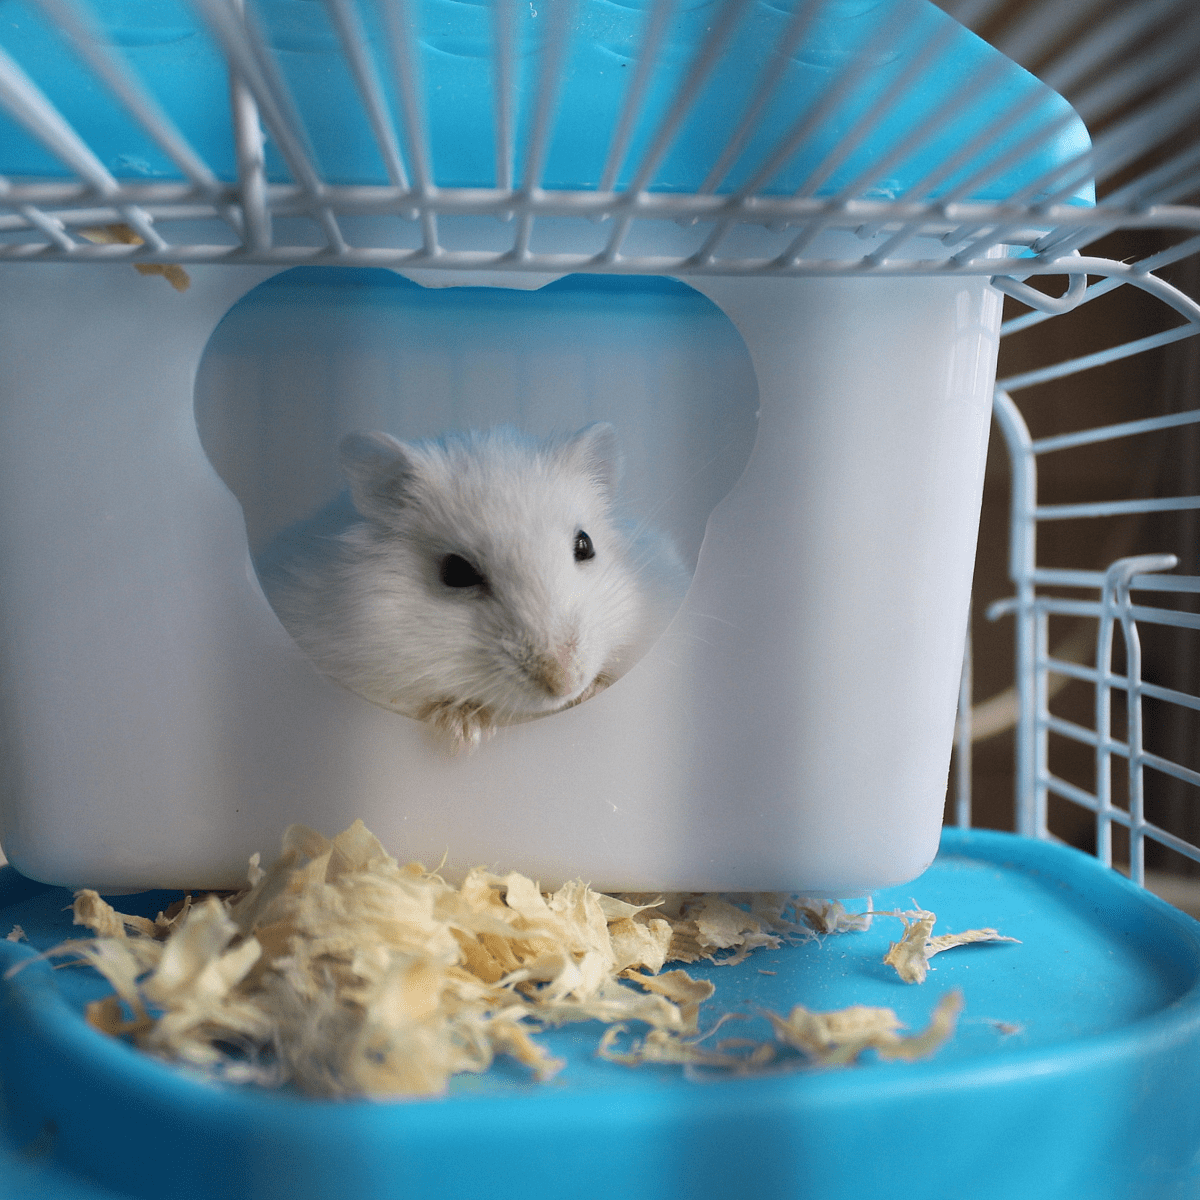 Why Doesn't My Hamster Trust Me? PetHelpful